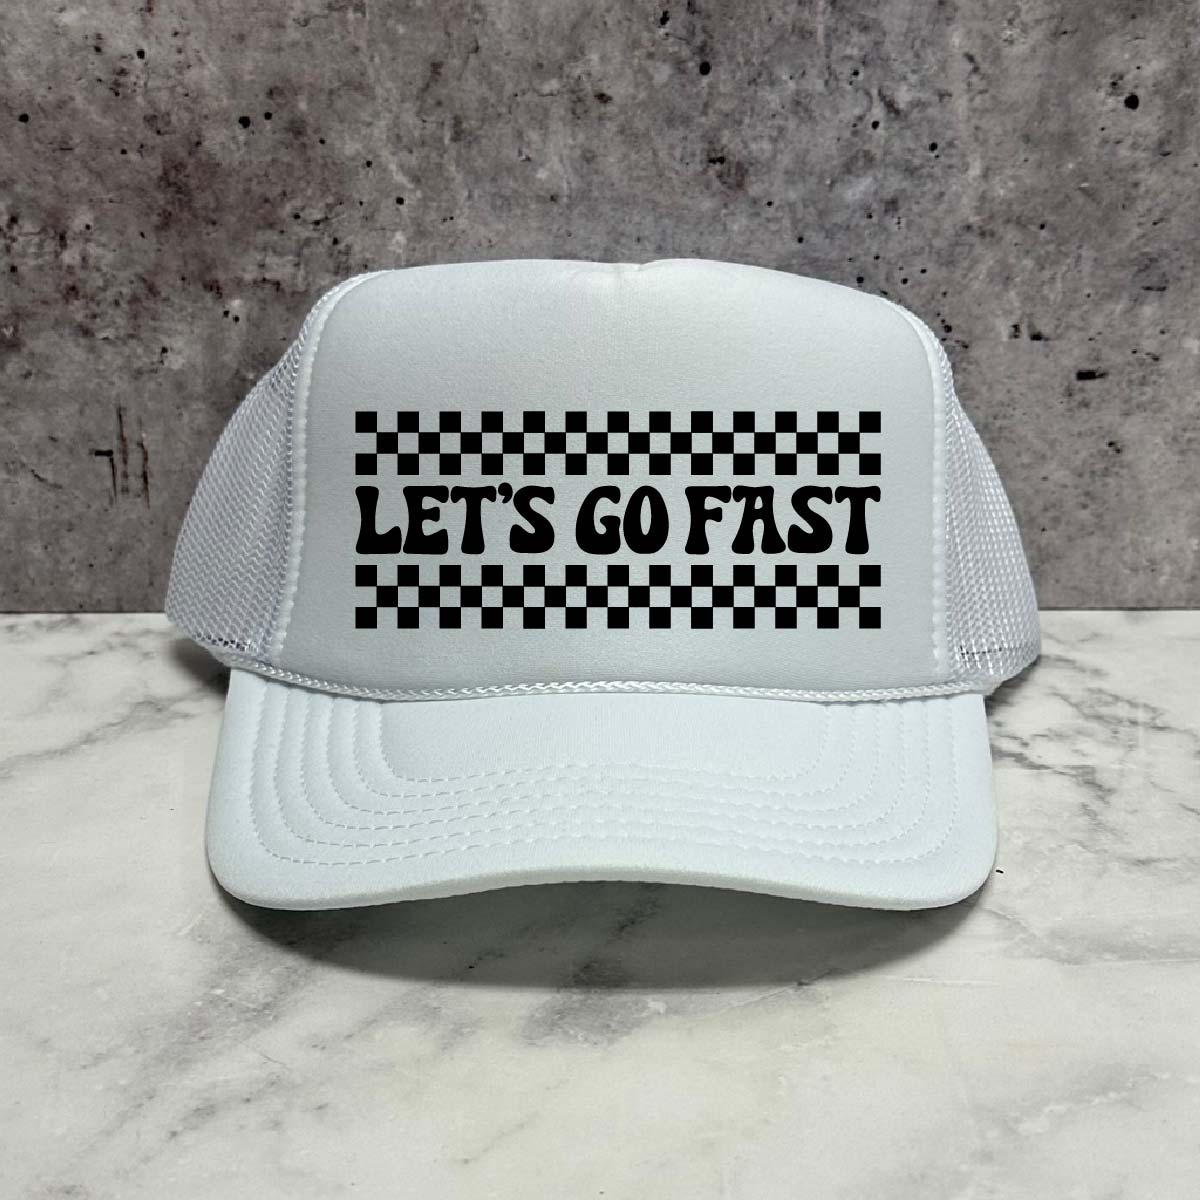 Let's Go Fast Checkered Trucker Hat